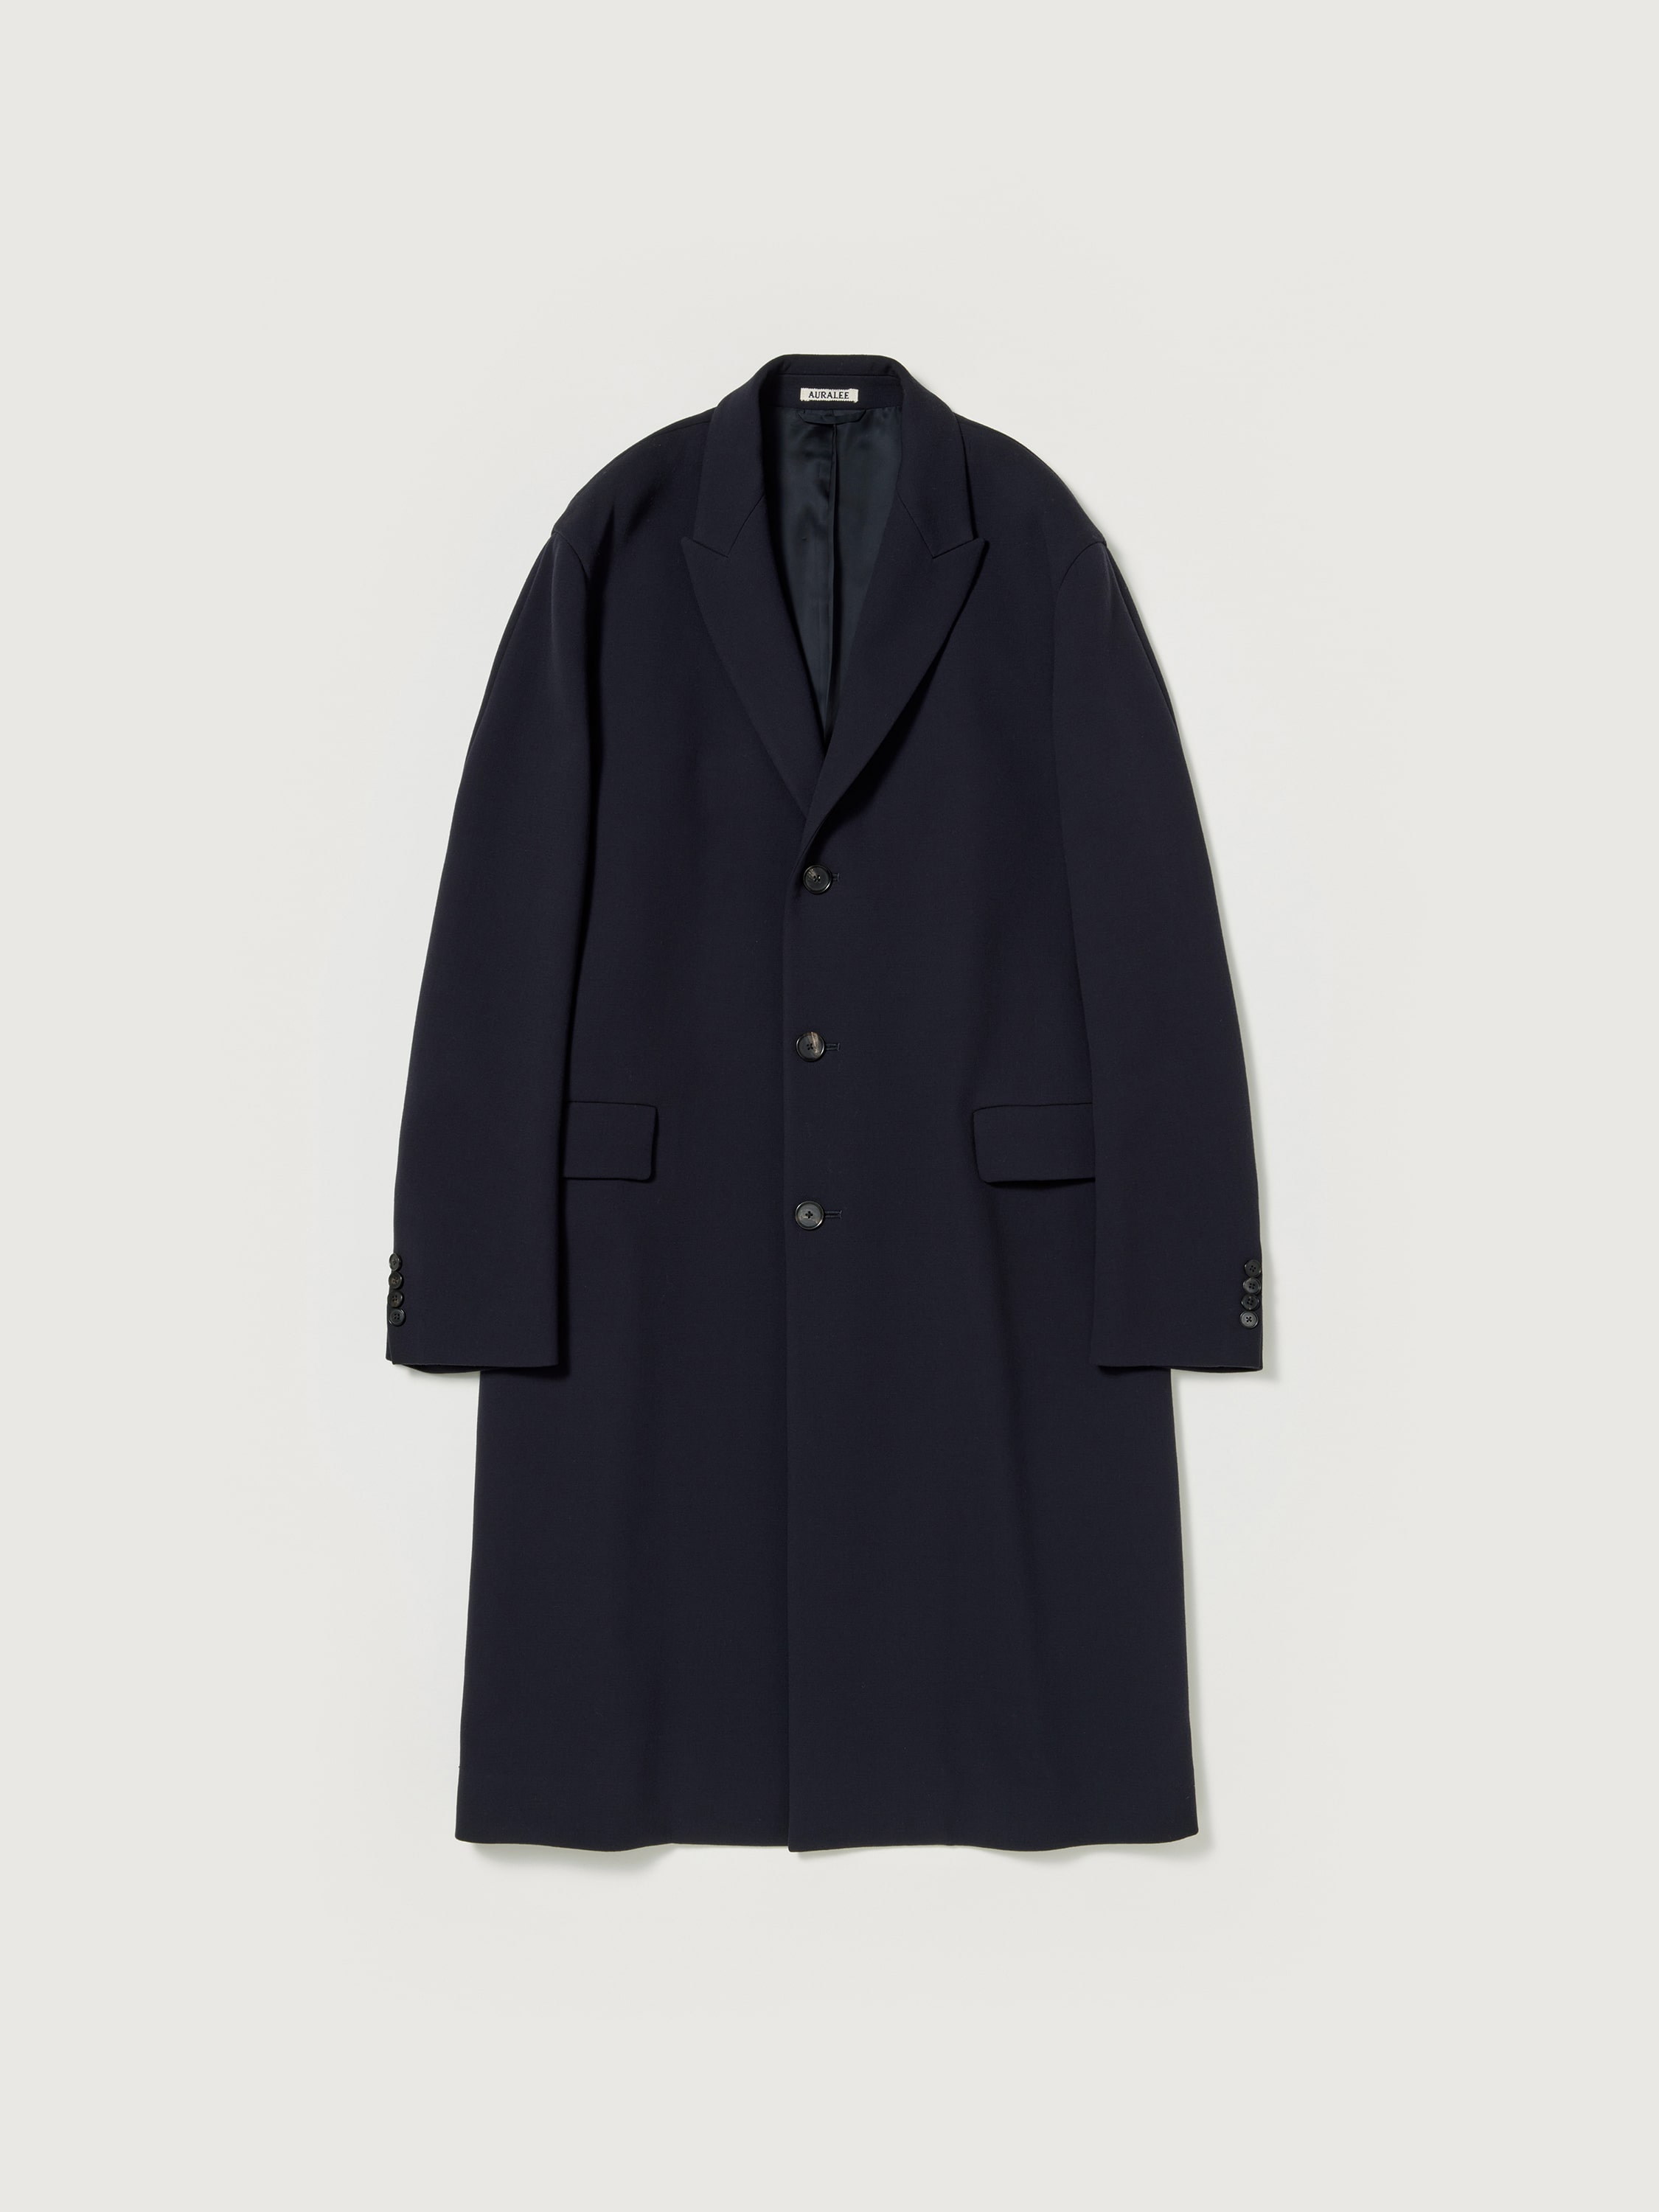 DOUBLE CLOTH HIGH COUNT WOOL CHESTERFIELD COAT 詳細画像 DARK NAVY 5